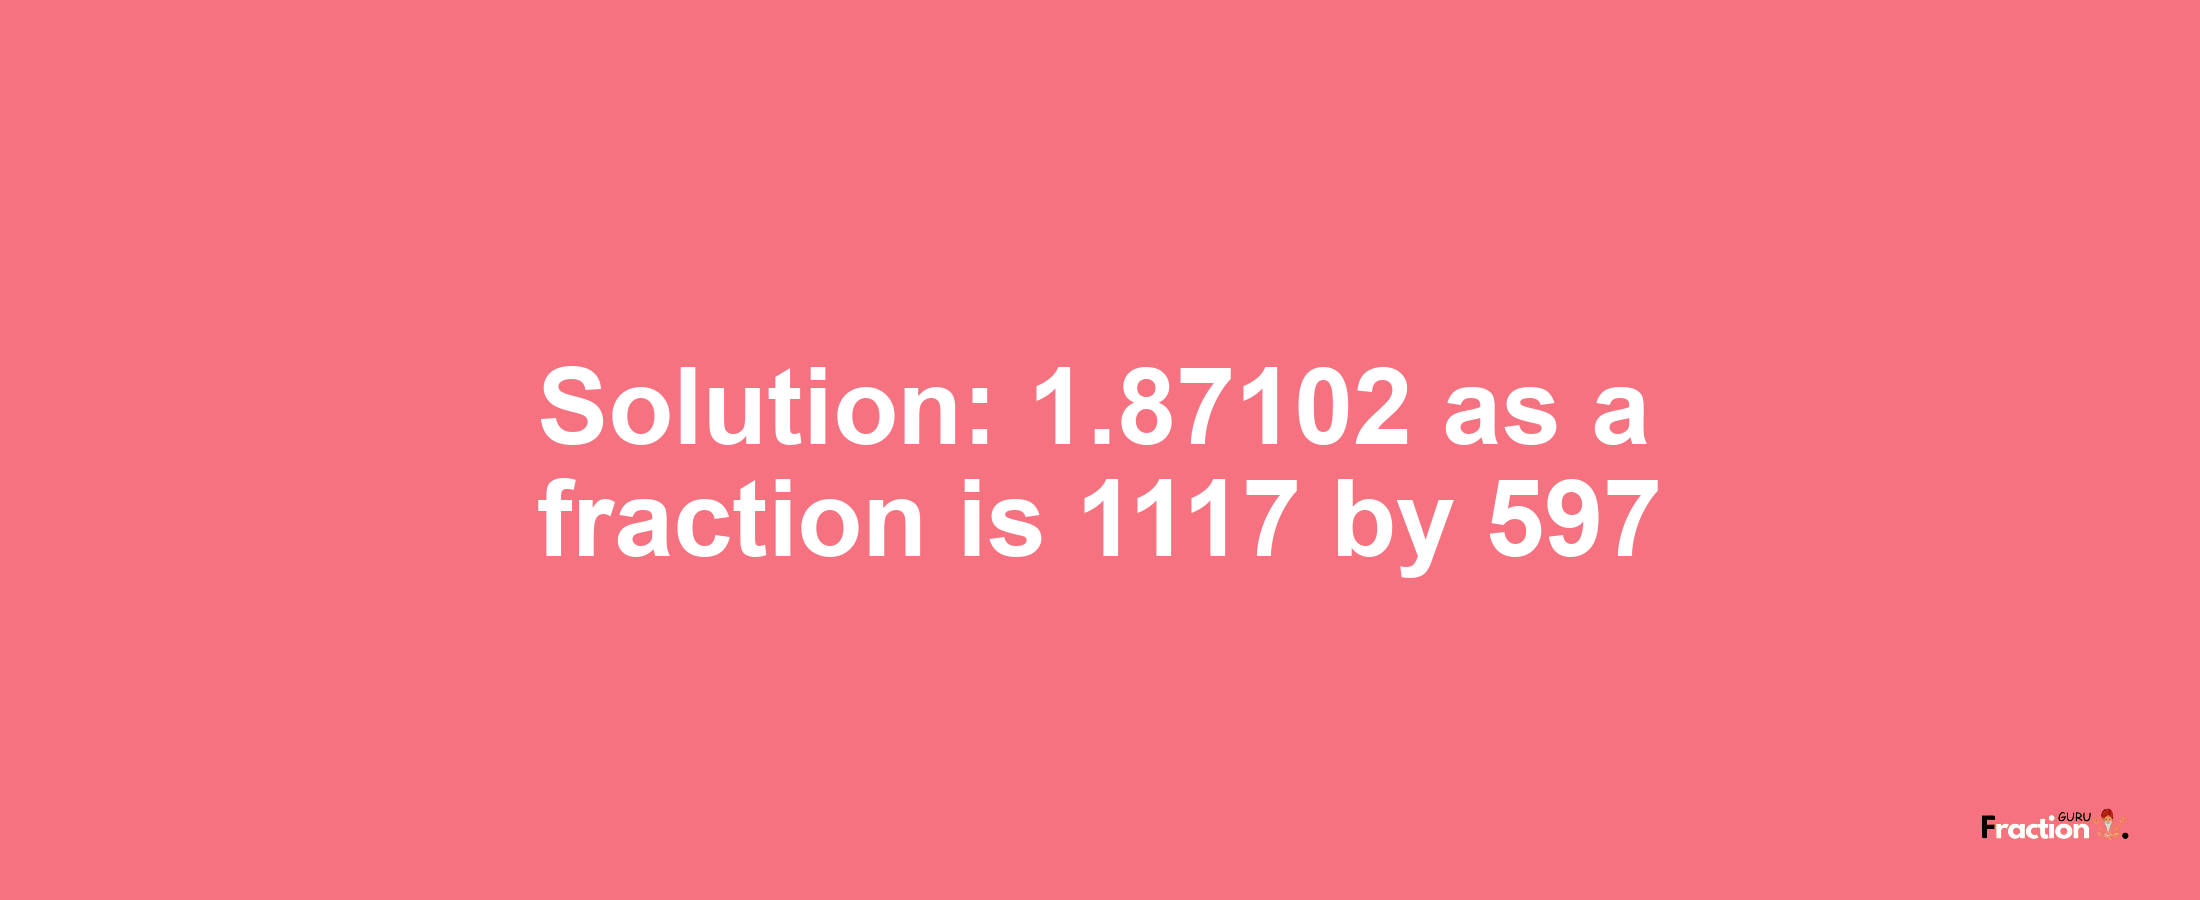 Solution:1.87102 as a fraction is 1117/597